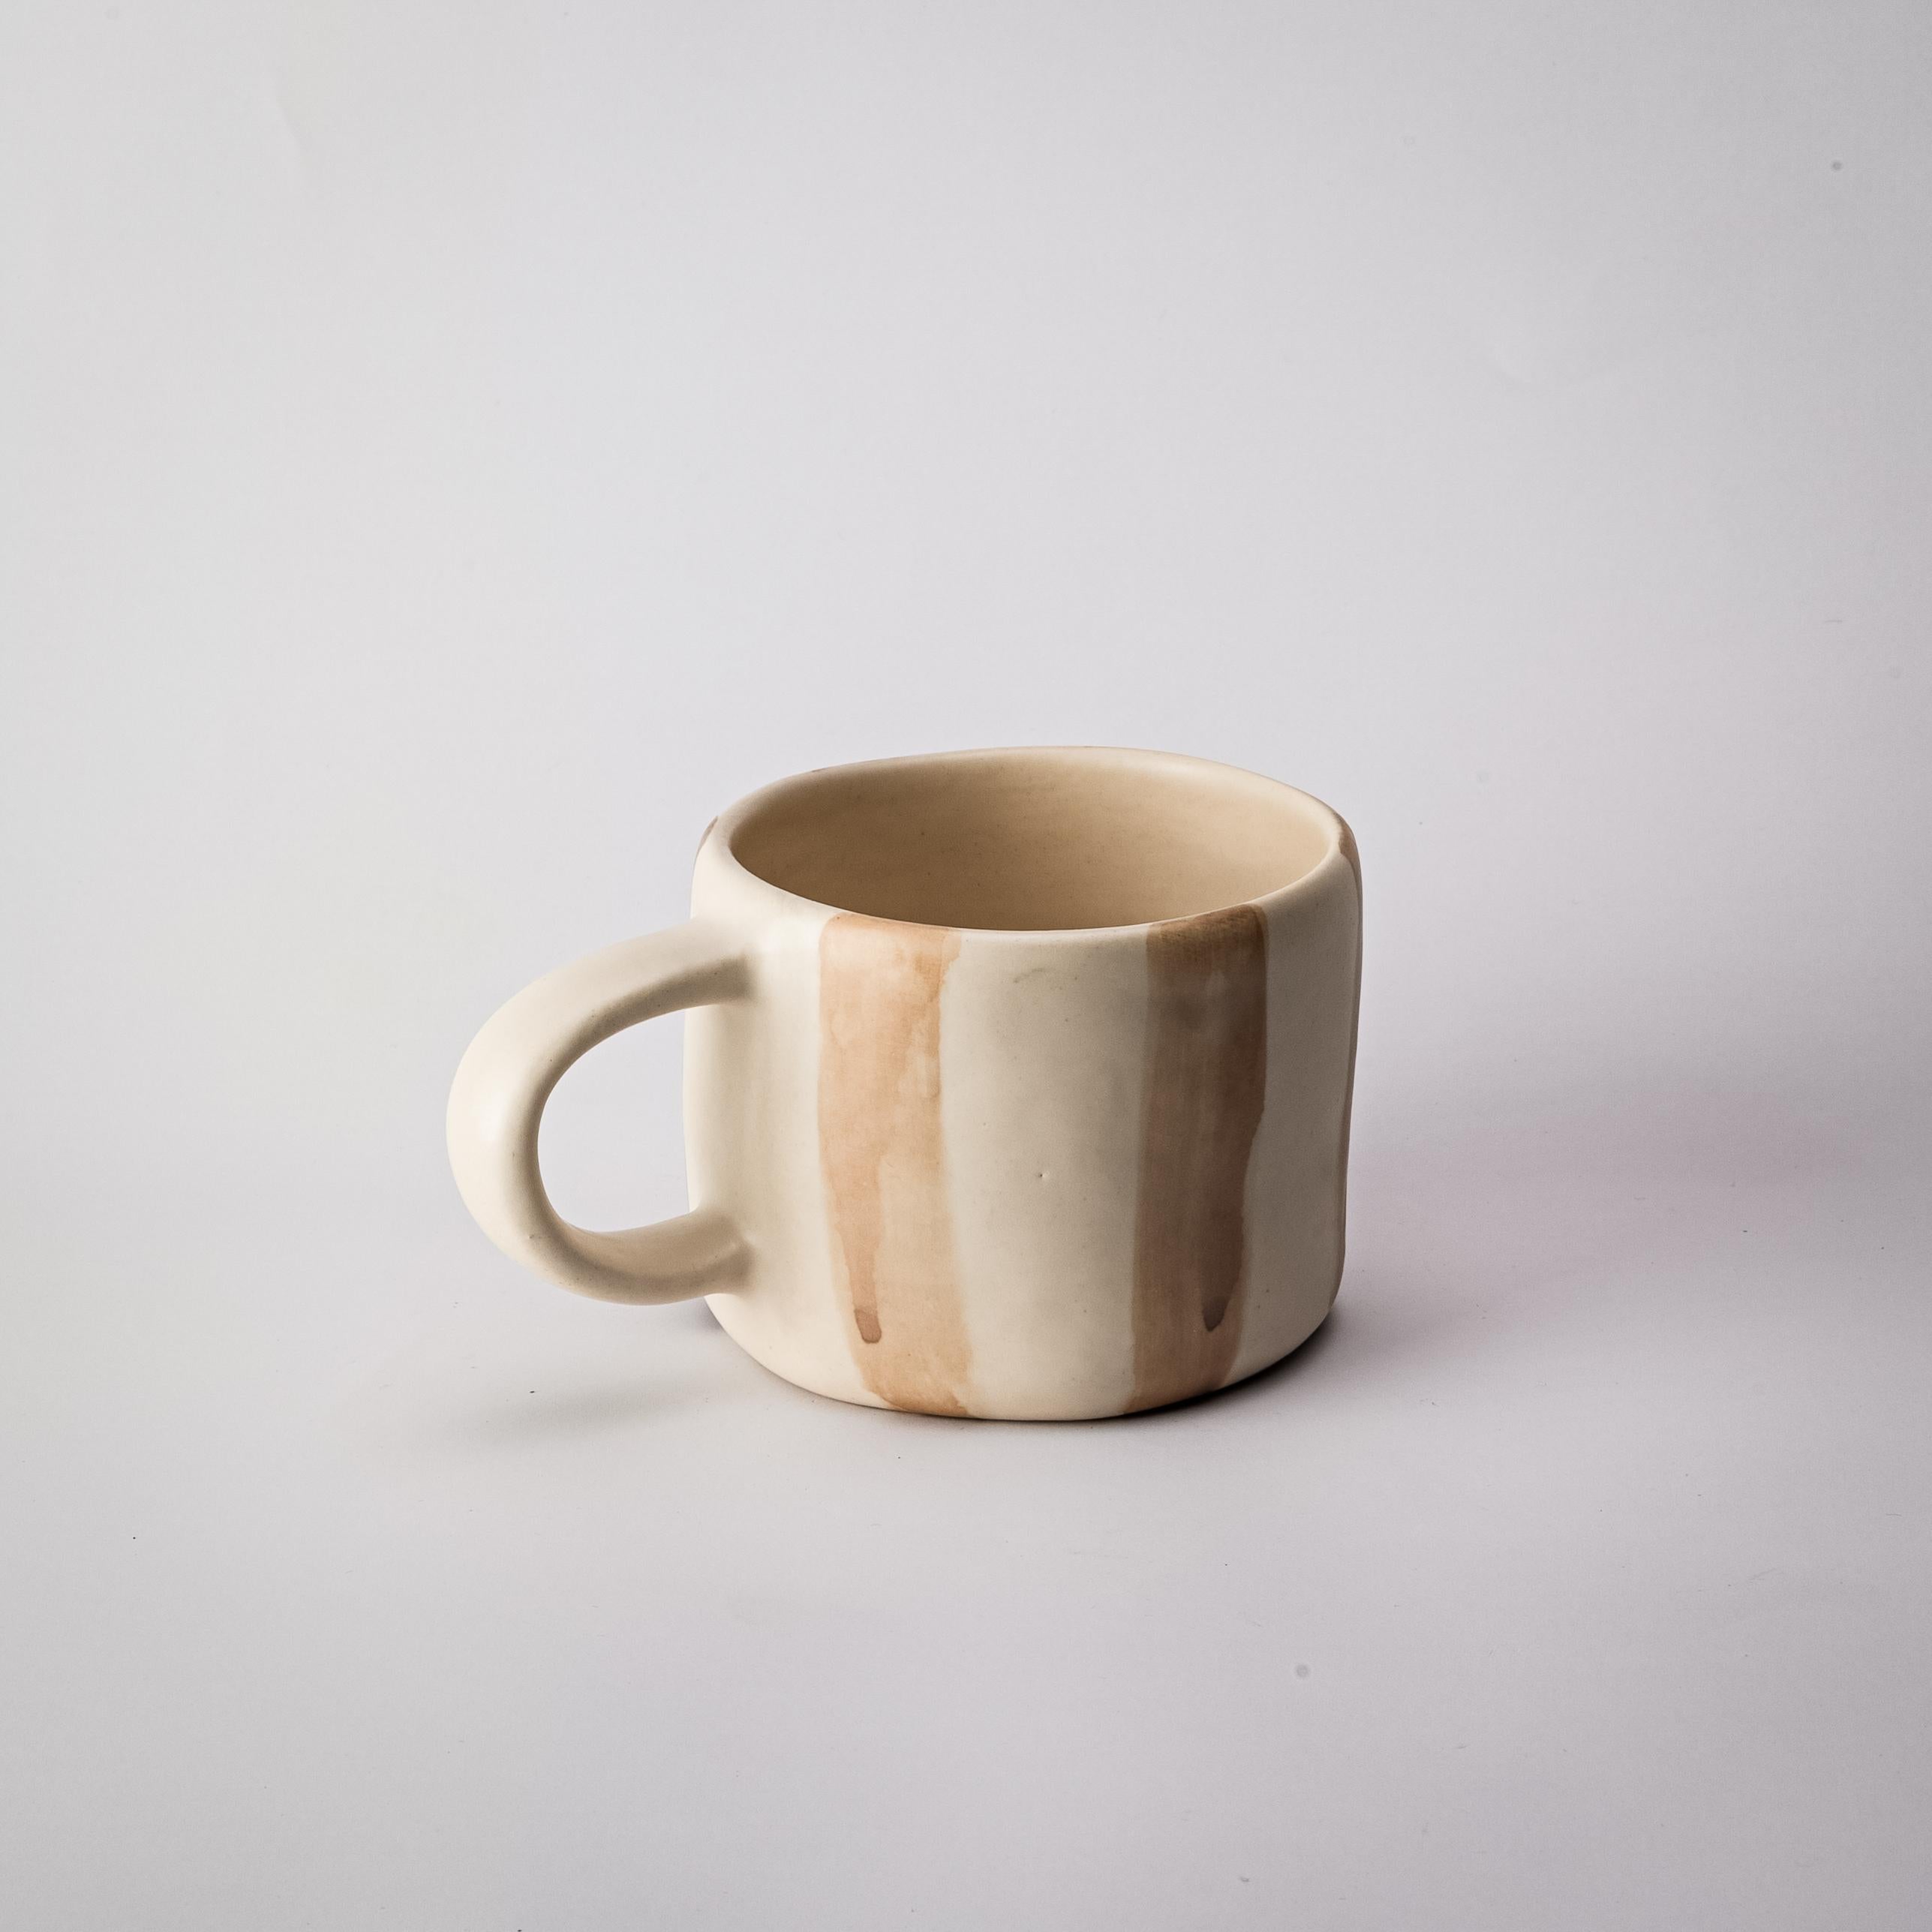 This handmade mug is perfect for your everyday use, morning coffee and afternoon tea. The ceramic mug is made of high quality and will bring you much satisfaction by its use. This mug will enhance your mood when you are having your morning coffee or